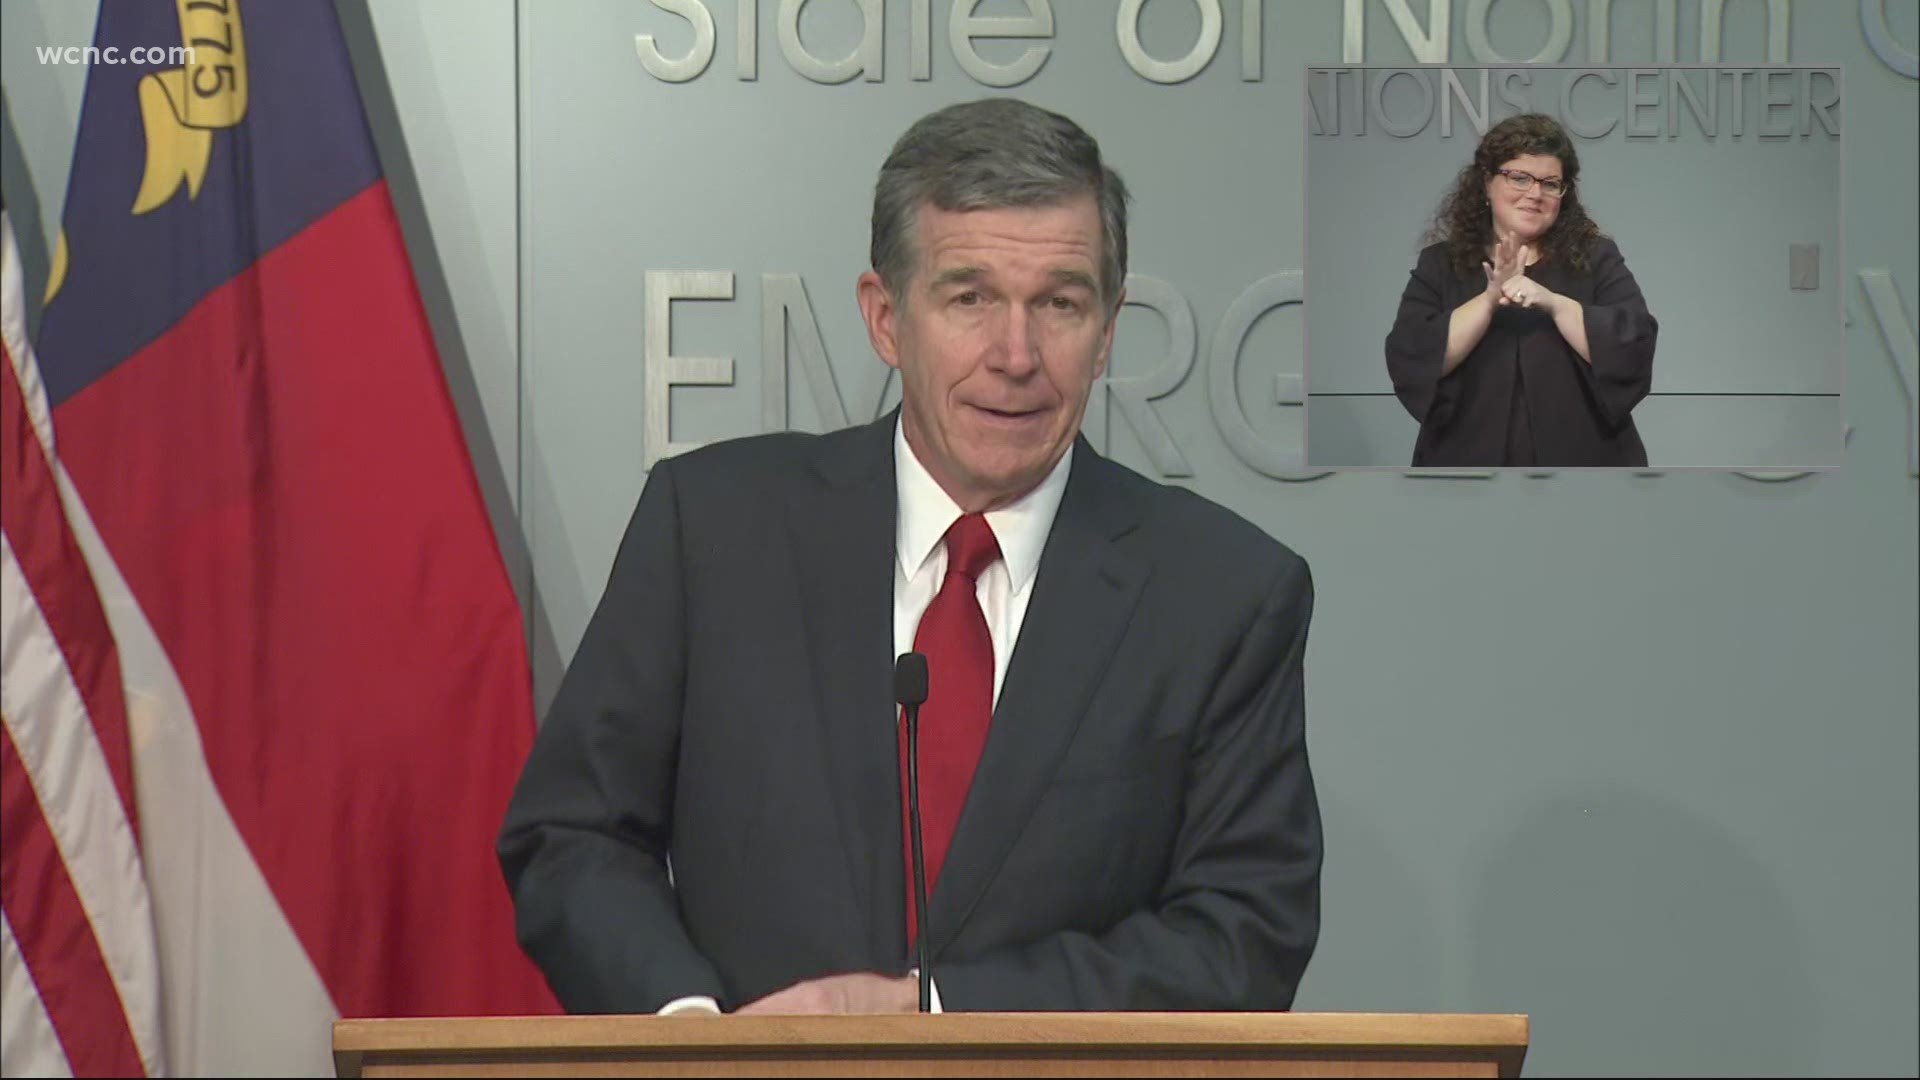 Gov. Roy Cooper says the state of North Carolina will enter Phase 3 of reopening on Friday at 5 p.m.